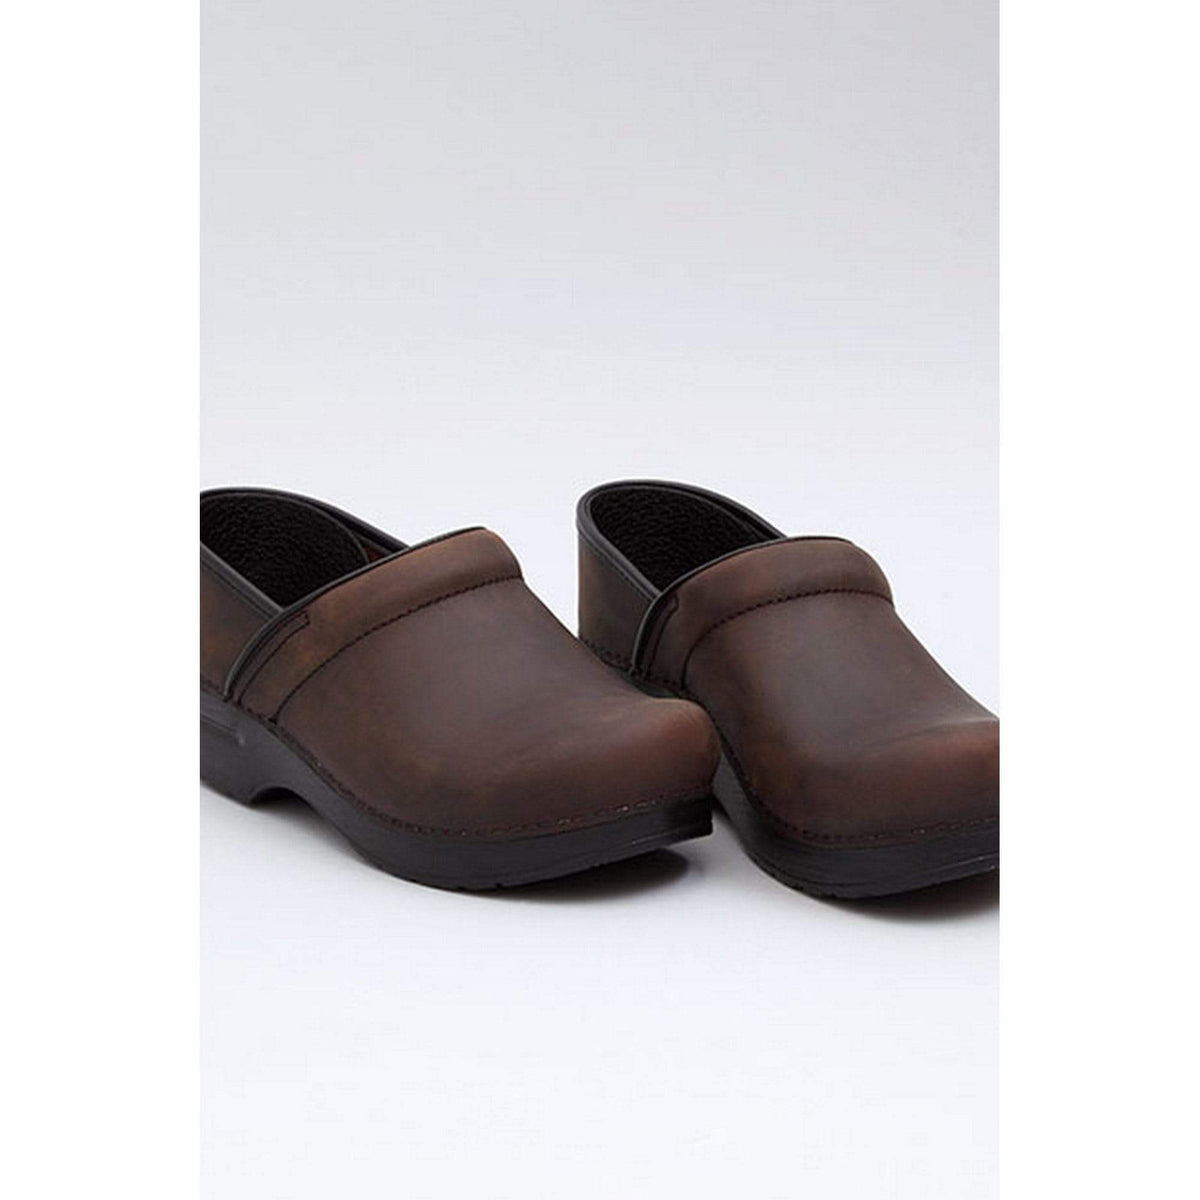 DANSKO WIDE Professional Brown Oiled Leather Clogs